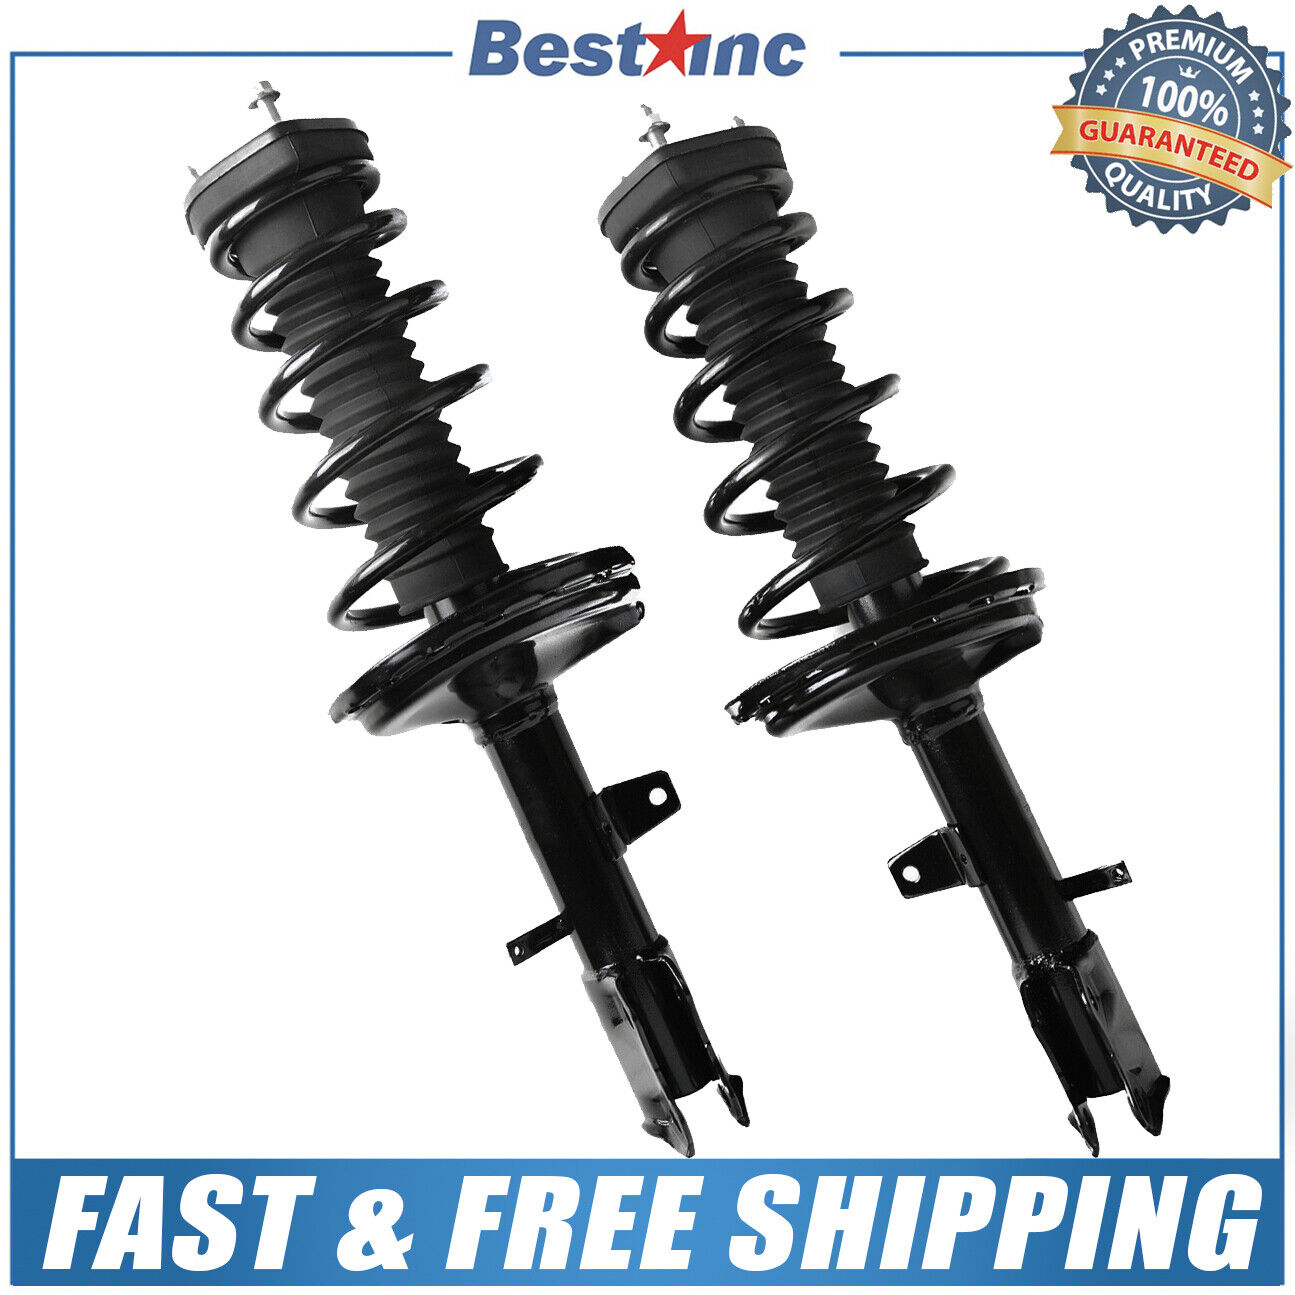 Rear Pair Complete Struts for 04-07 Toyota Highlander;Lexus RX330&RX350 AWD